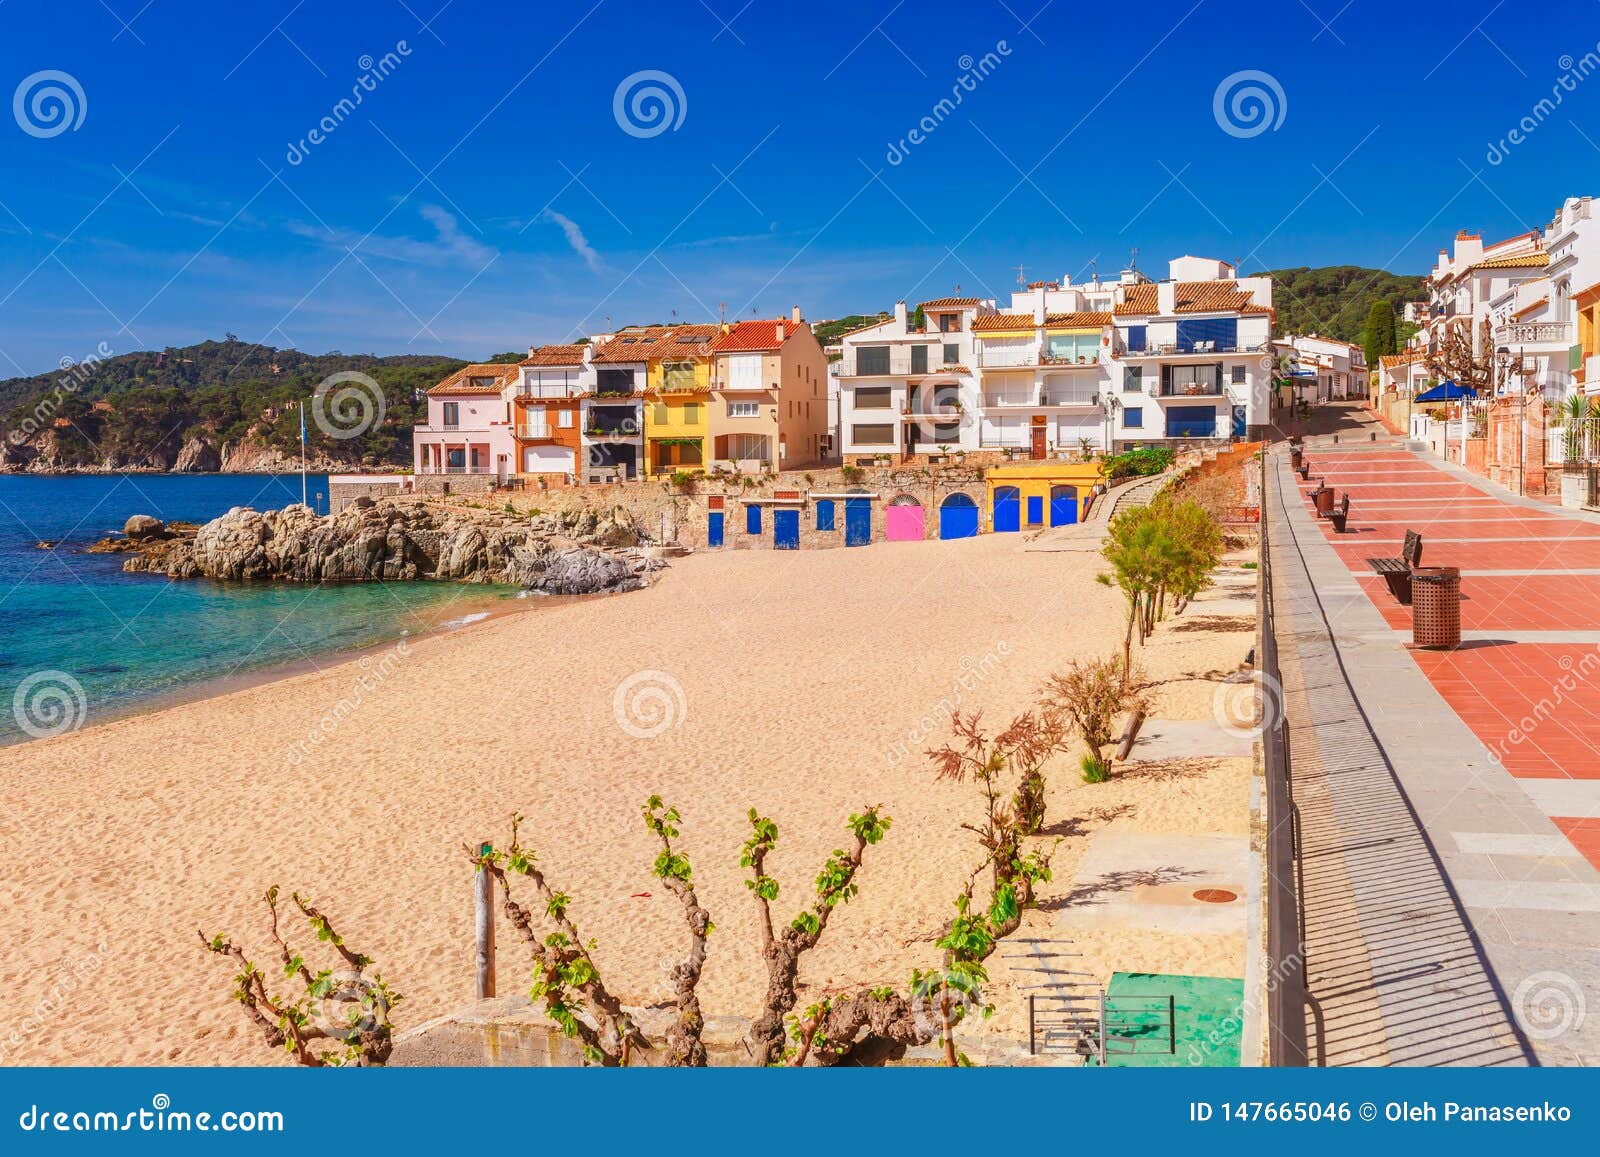 sea landscape with calella de palafrugell, catalonia, spain near of barcelona. scenic fisherman village with nice sand beach and